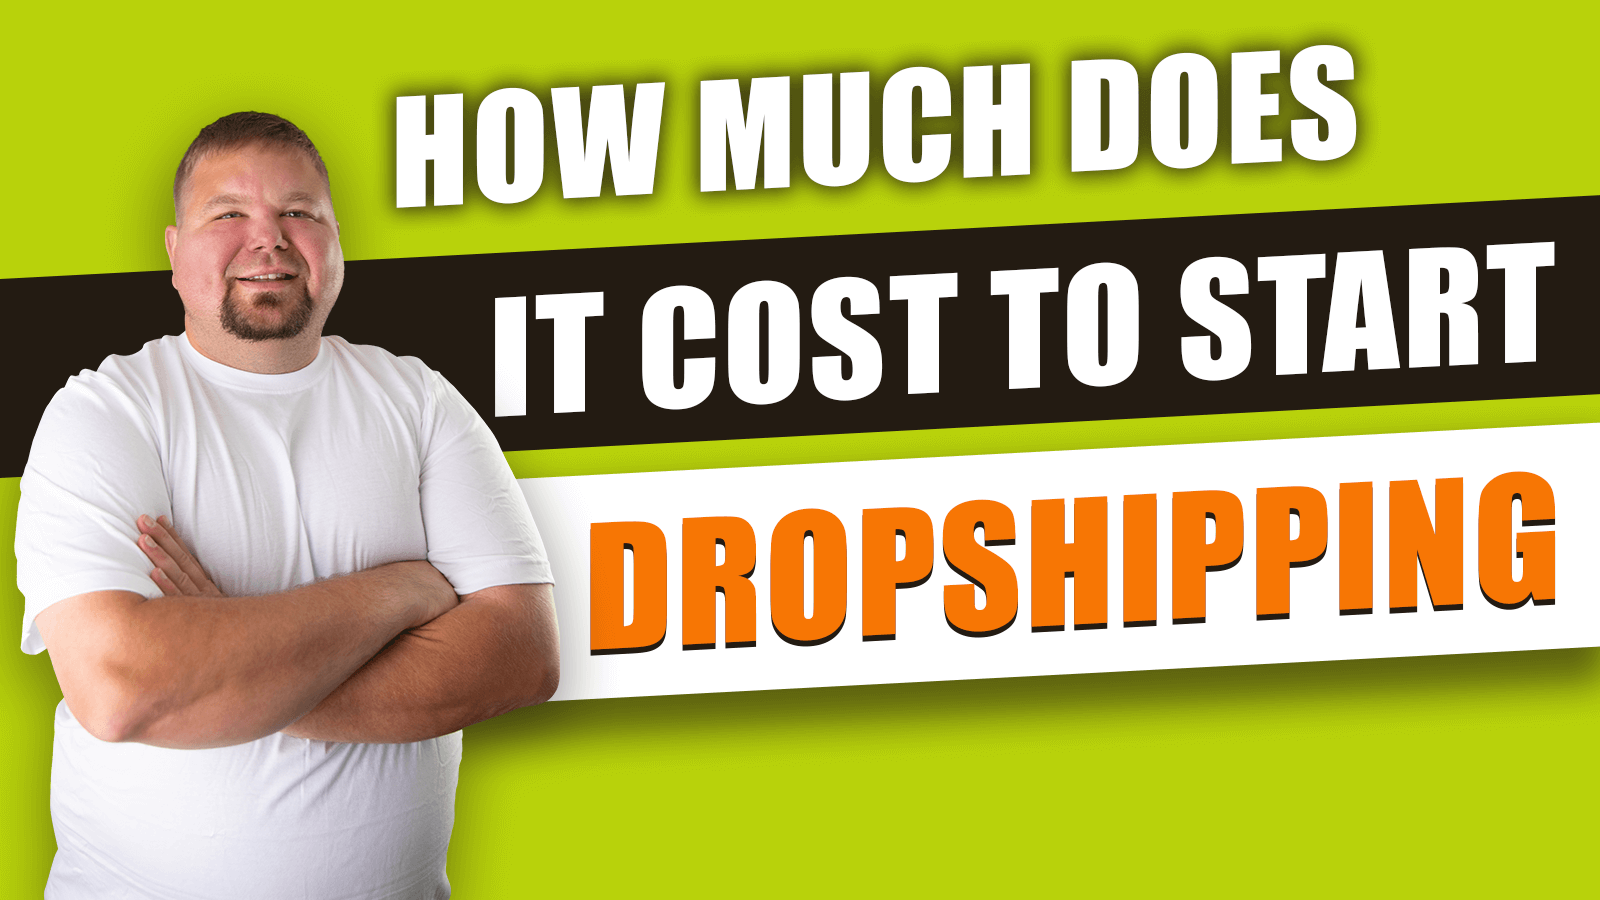 How Much Does it Cost to Start Dropshipping